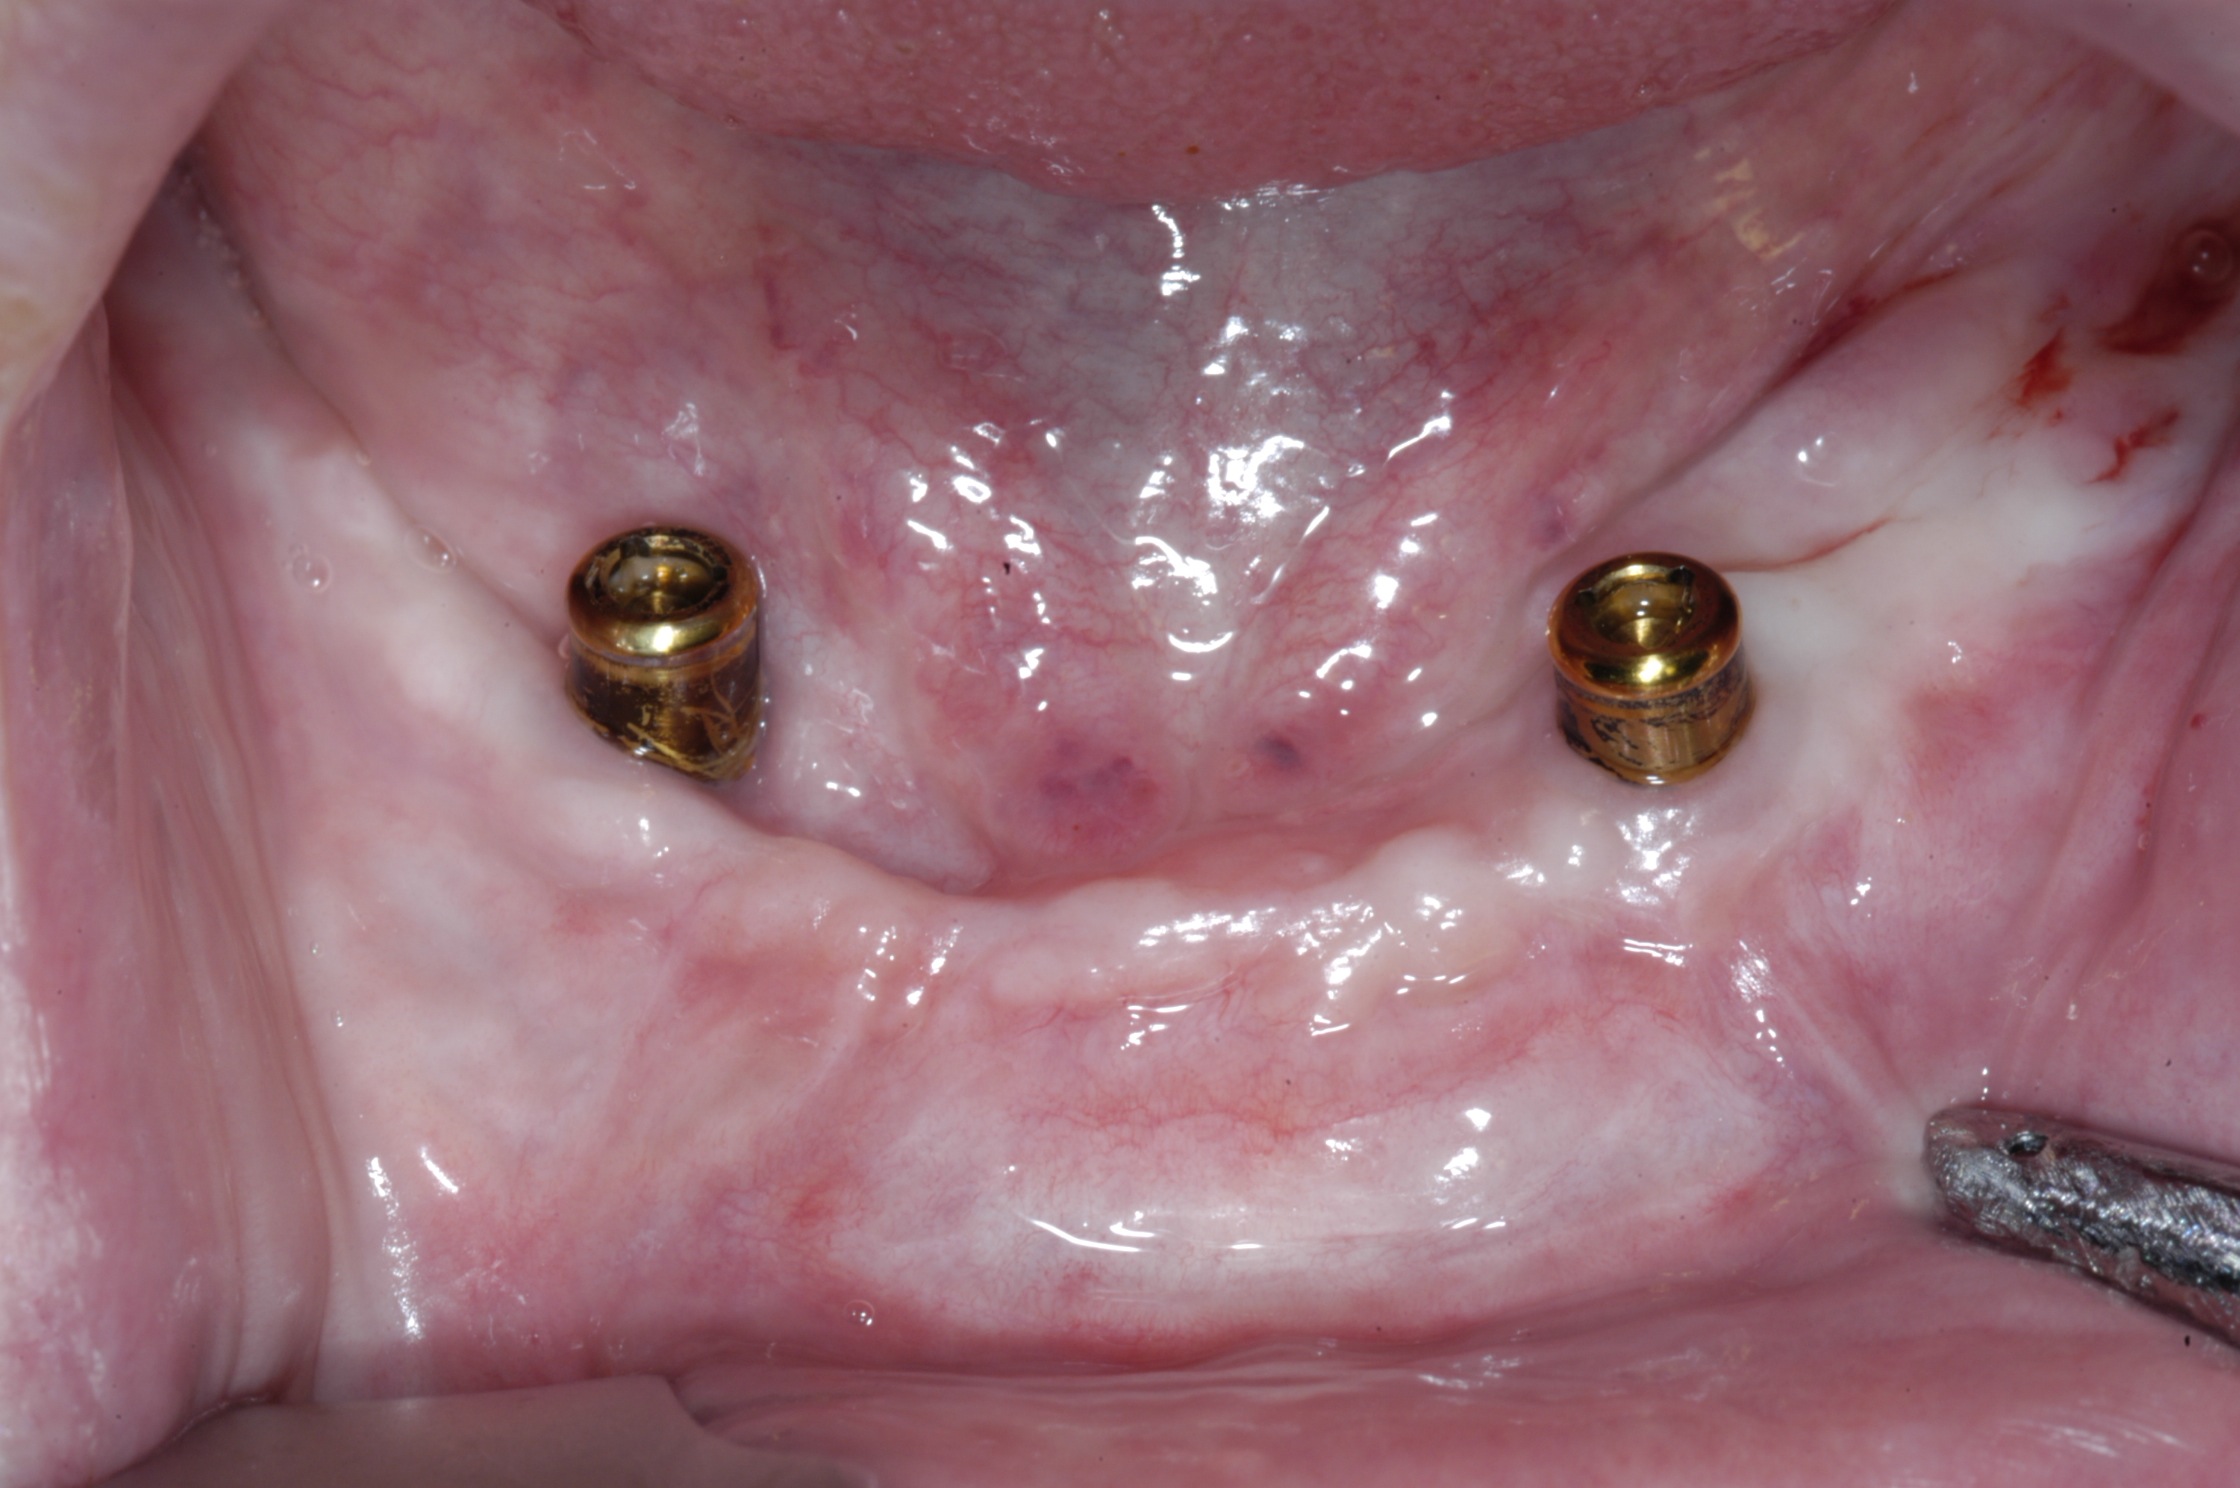 Two implants for overdenture support